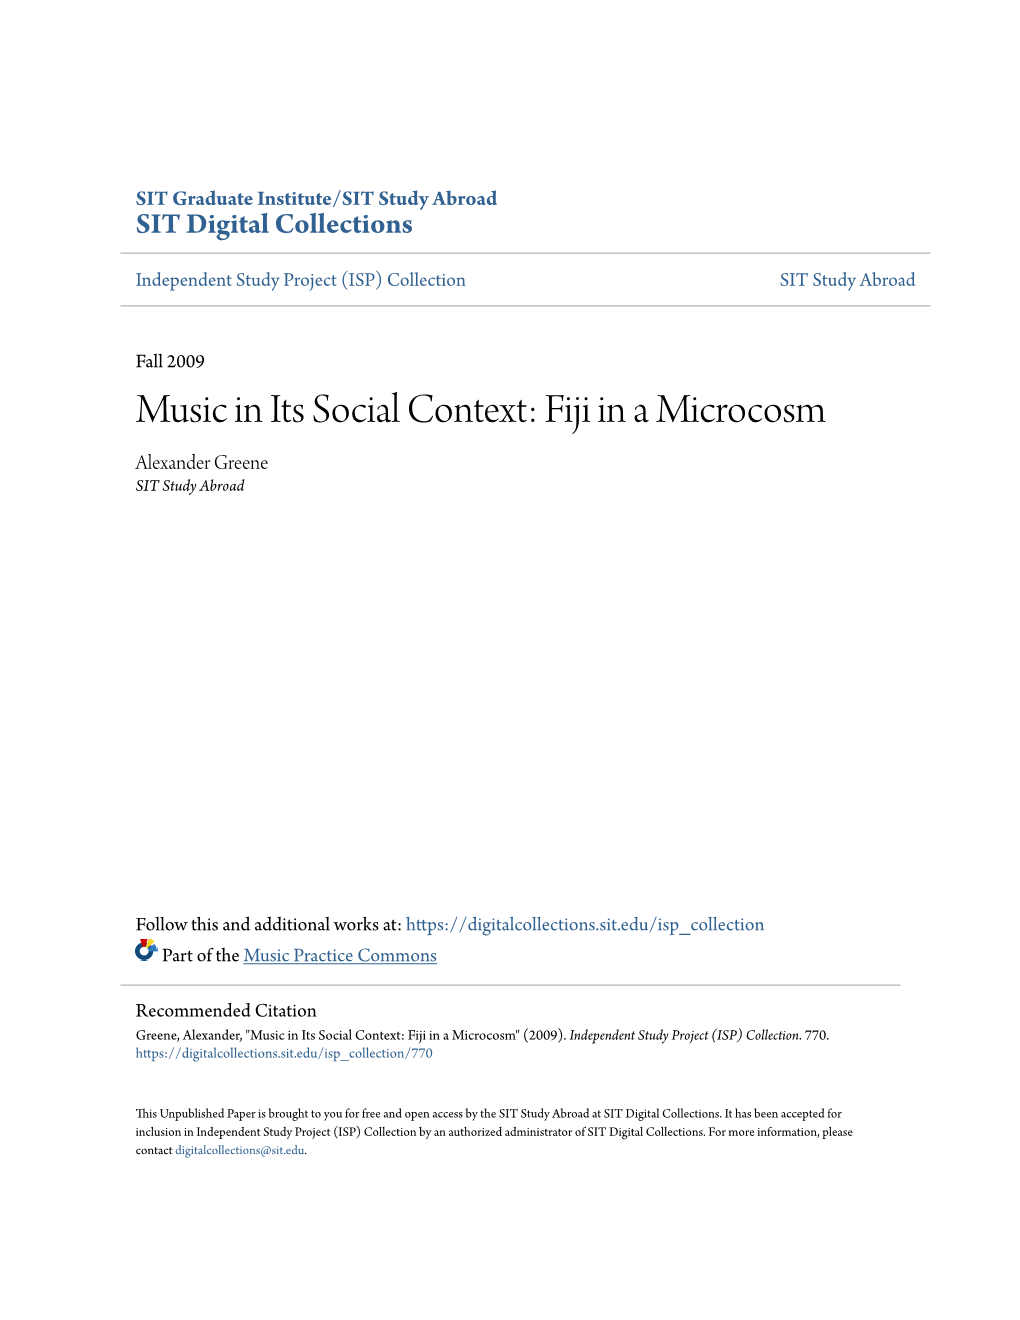 Music in Its Social Context: Fiji in a Microcosm Alexander Greene SIT Study Abroad